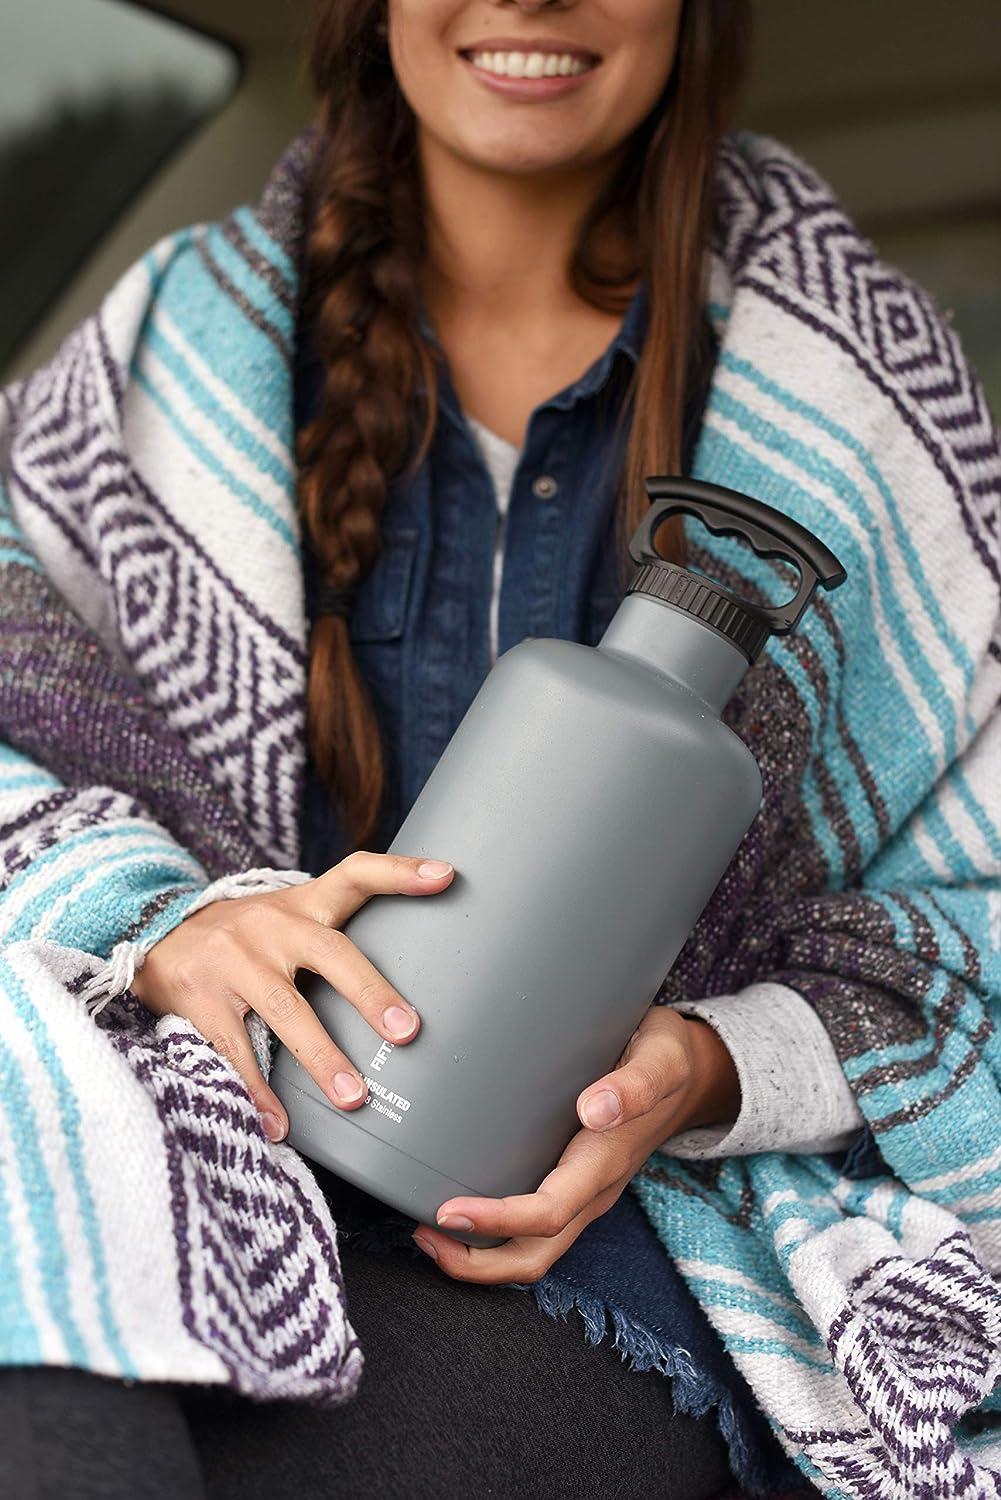 Extra Large Water Bottle, Stainless Steel, Large Insulated Water Bottles  (64 oz)